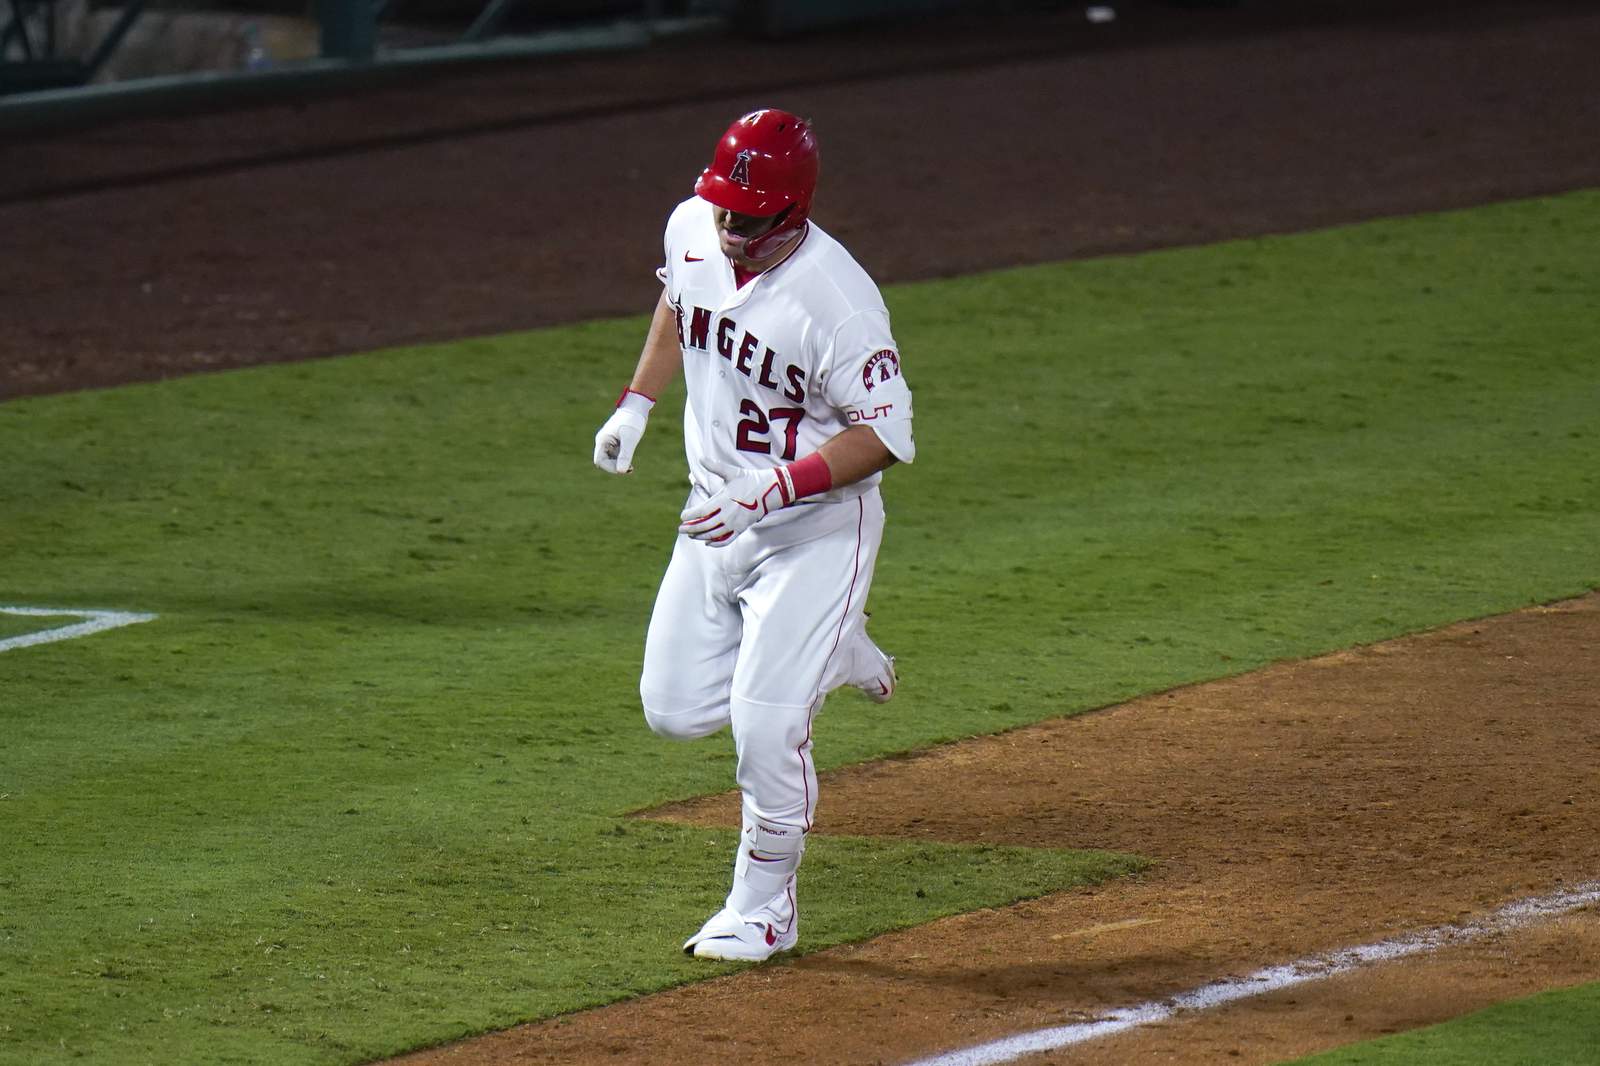 Trout homers twice, helps Angels rally to 10-9 win over A's